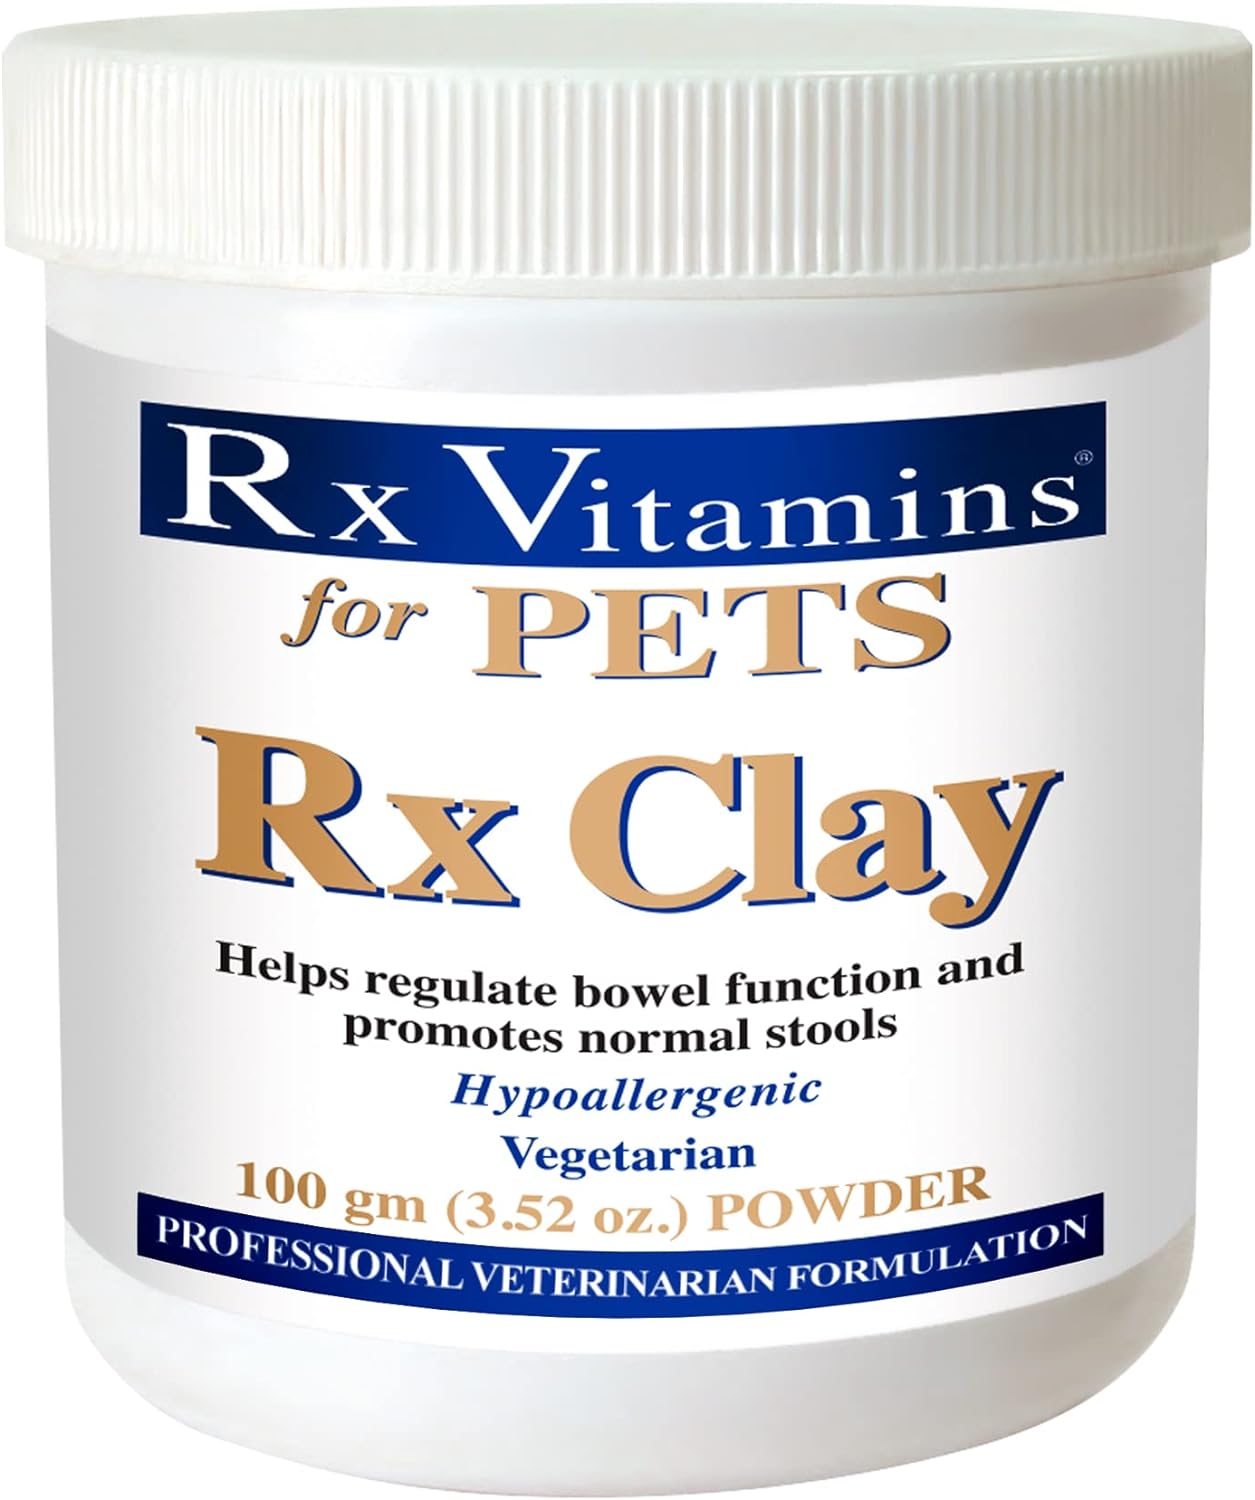 Rx Vitamins Rx Clay Powder for Pets - Anti Gas & Anti Diarrhea for Dogs & Cats - Pet Digestive Health & Stool Support - Cat & Dog Supplement for Elimination- 3.52 oz. : Pet Supplies